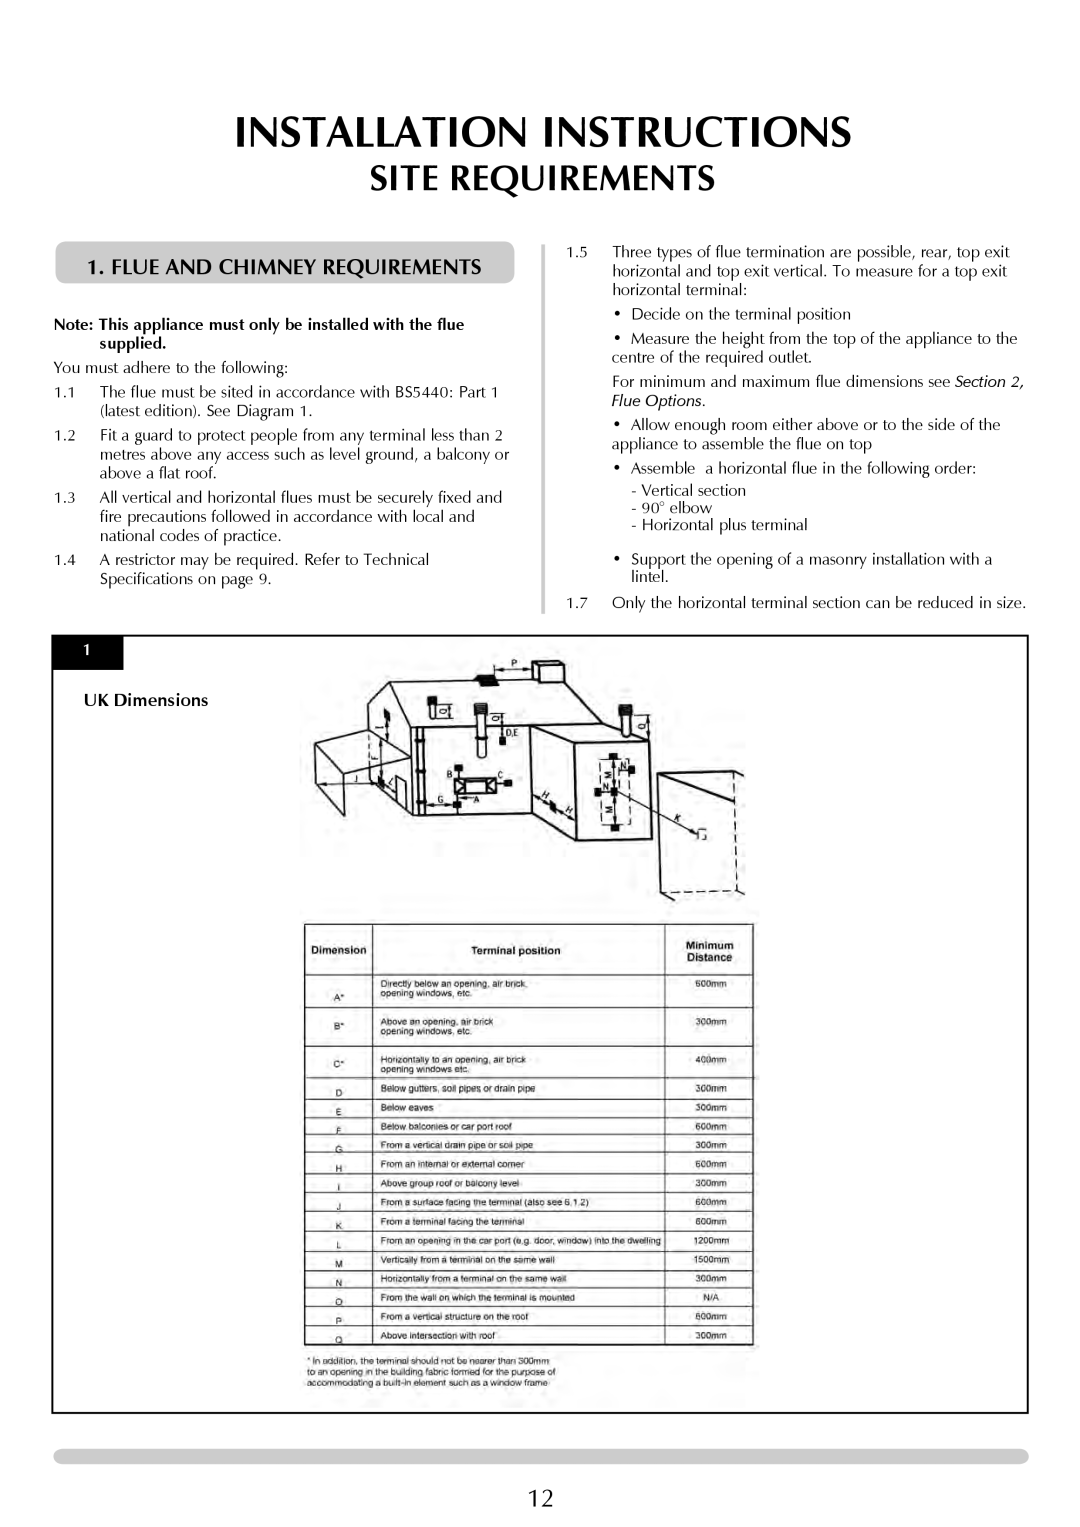 Stovax Studio 22 manual Site Requirements, Flue and Chimney Requirements, Installation Instructions 